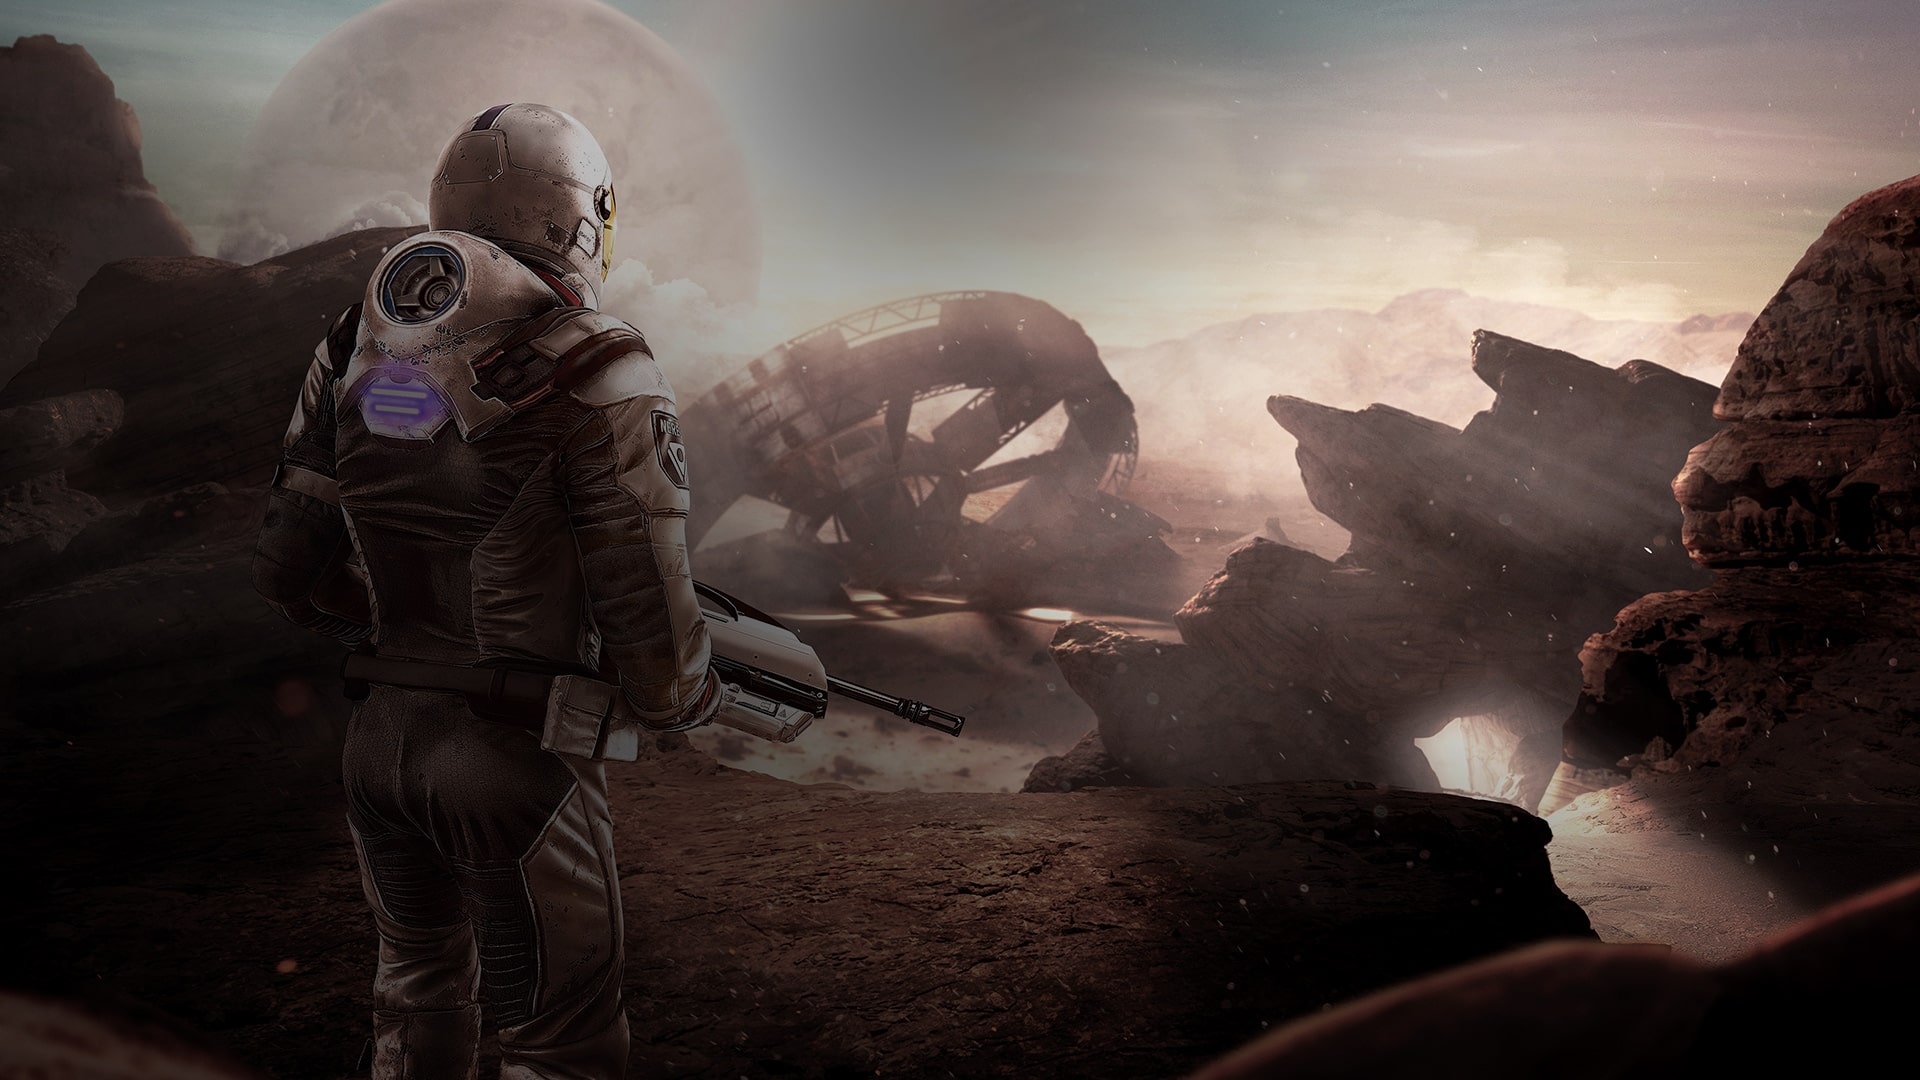 farpoint playstation store